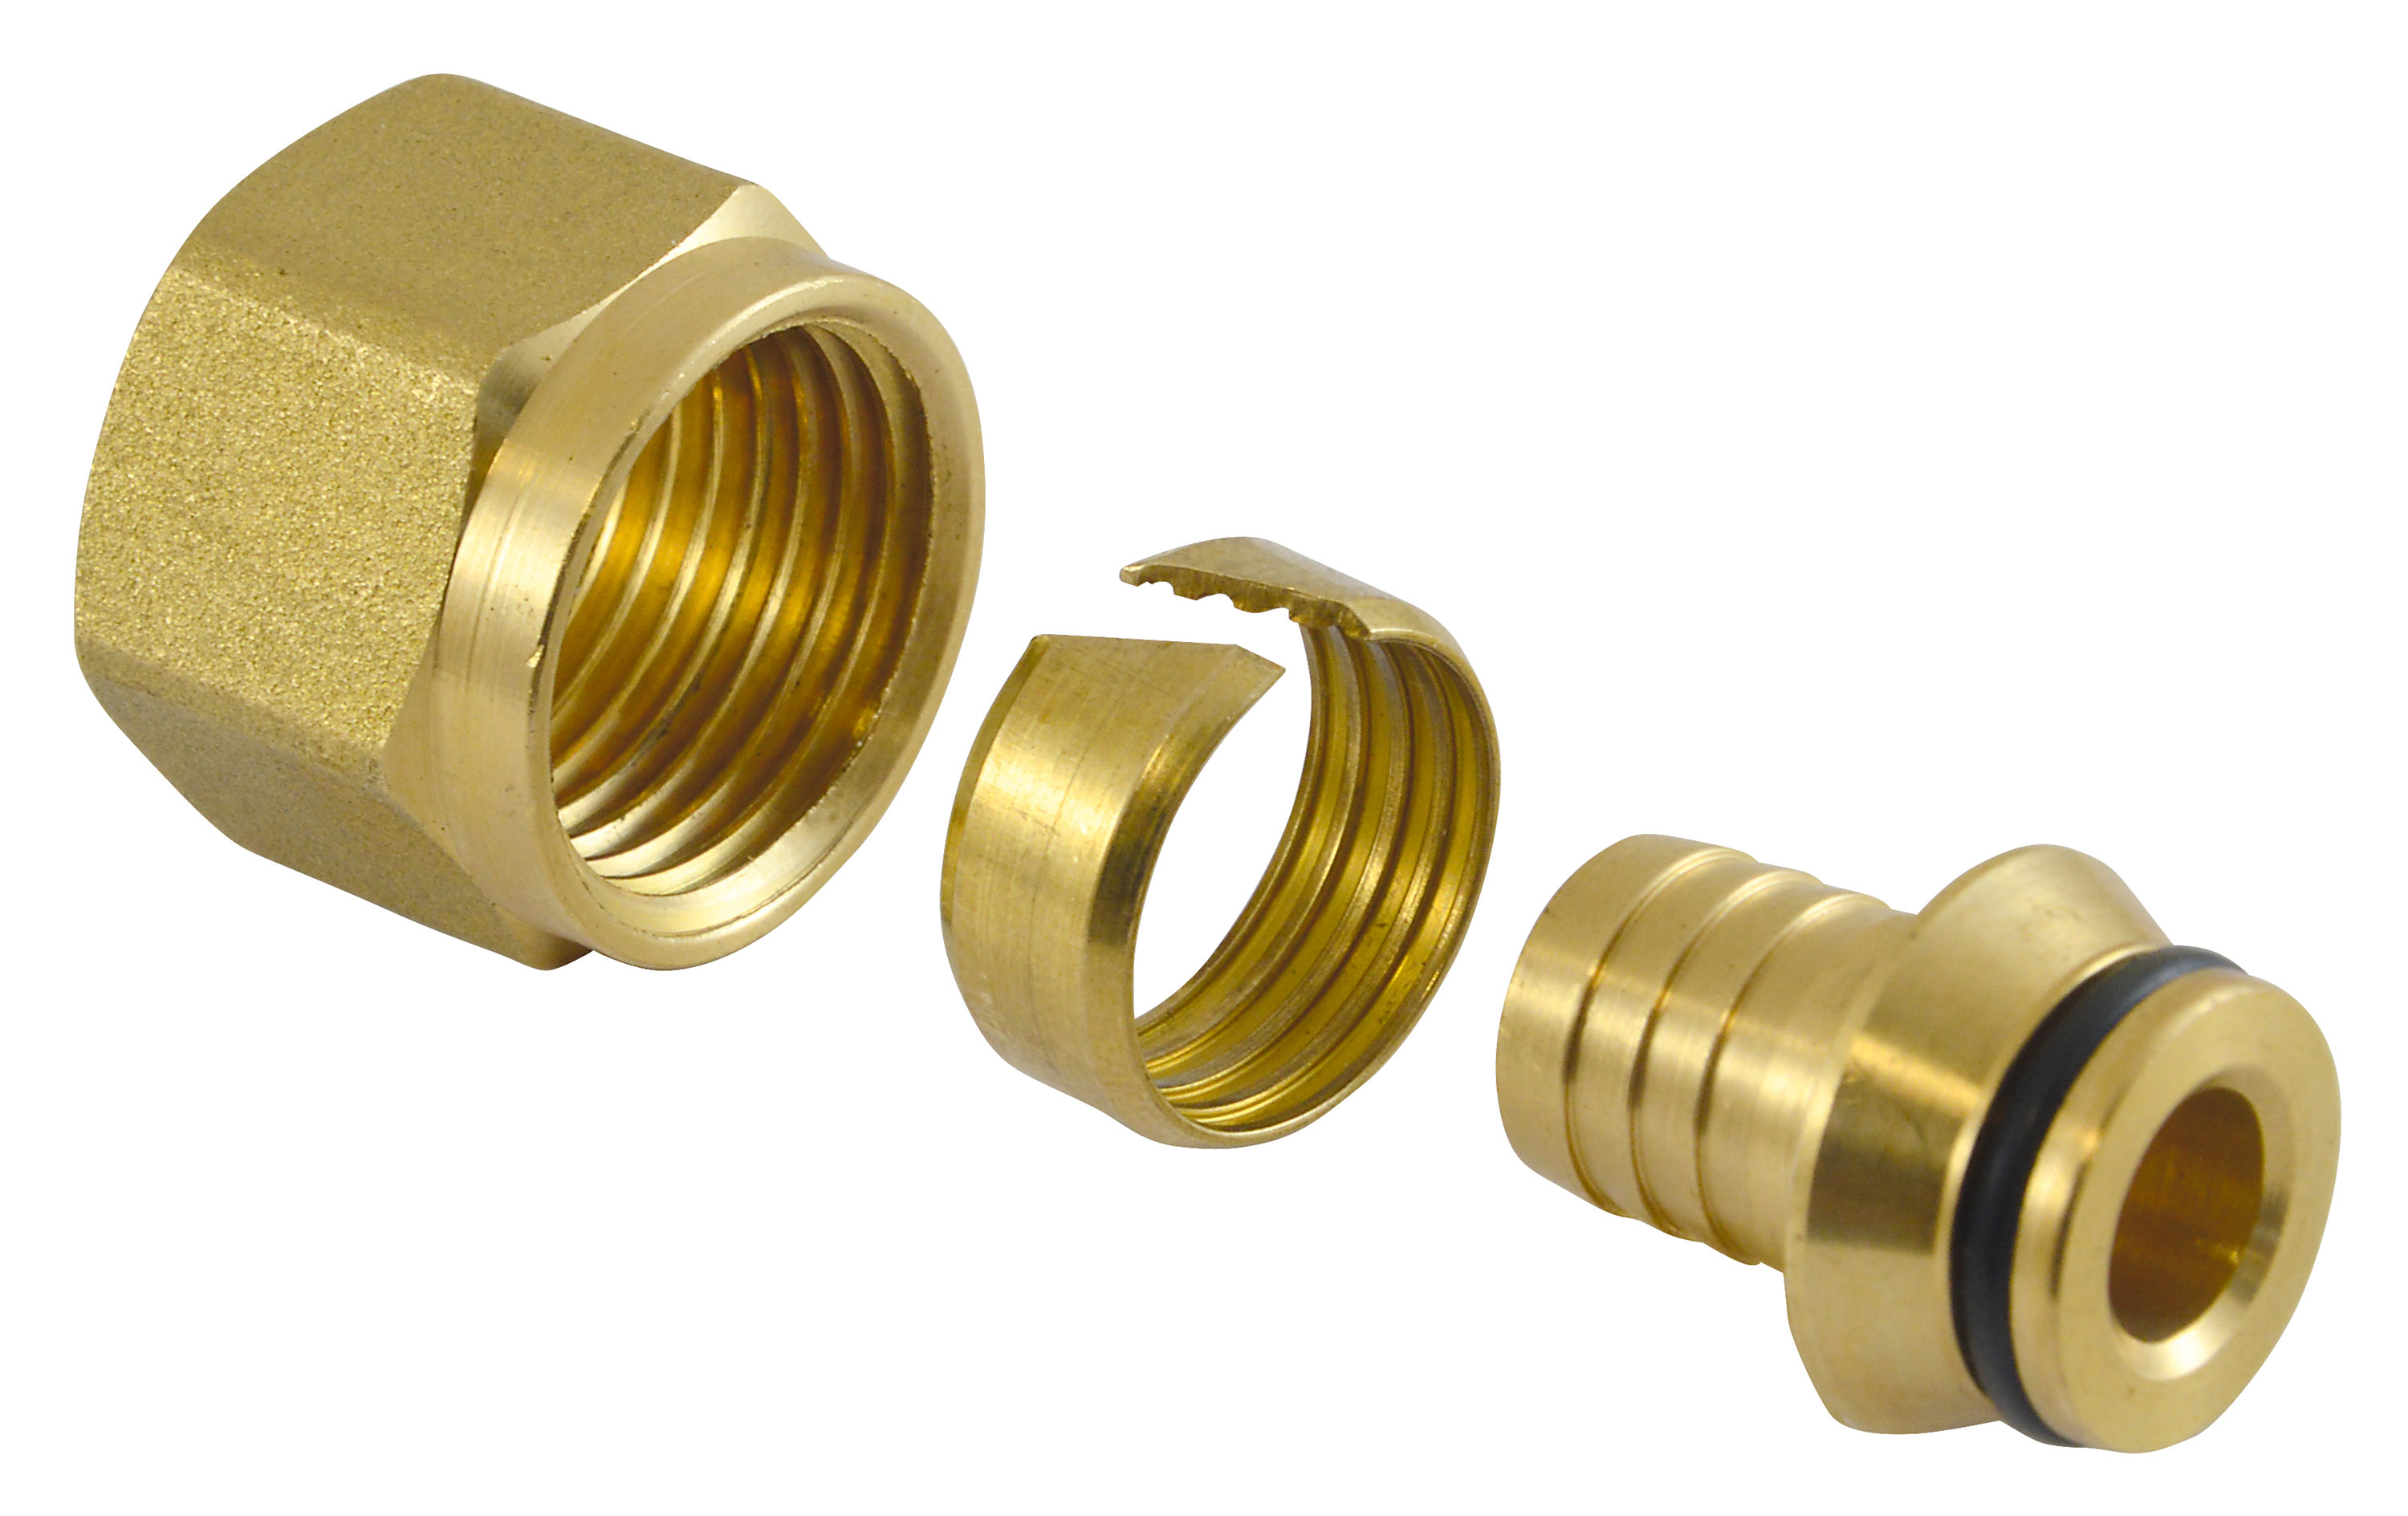 1/2” threaded compression fitting for 16 x 2 mm homogeneous